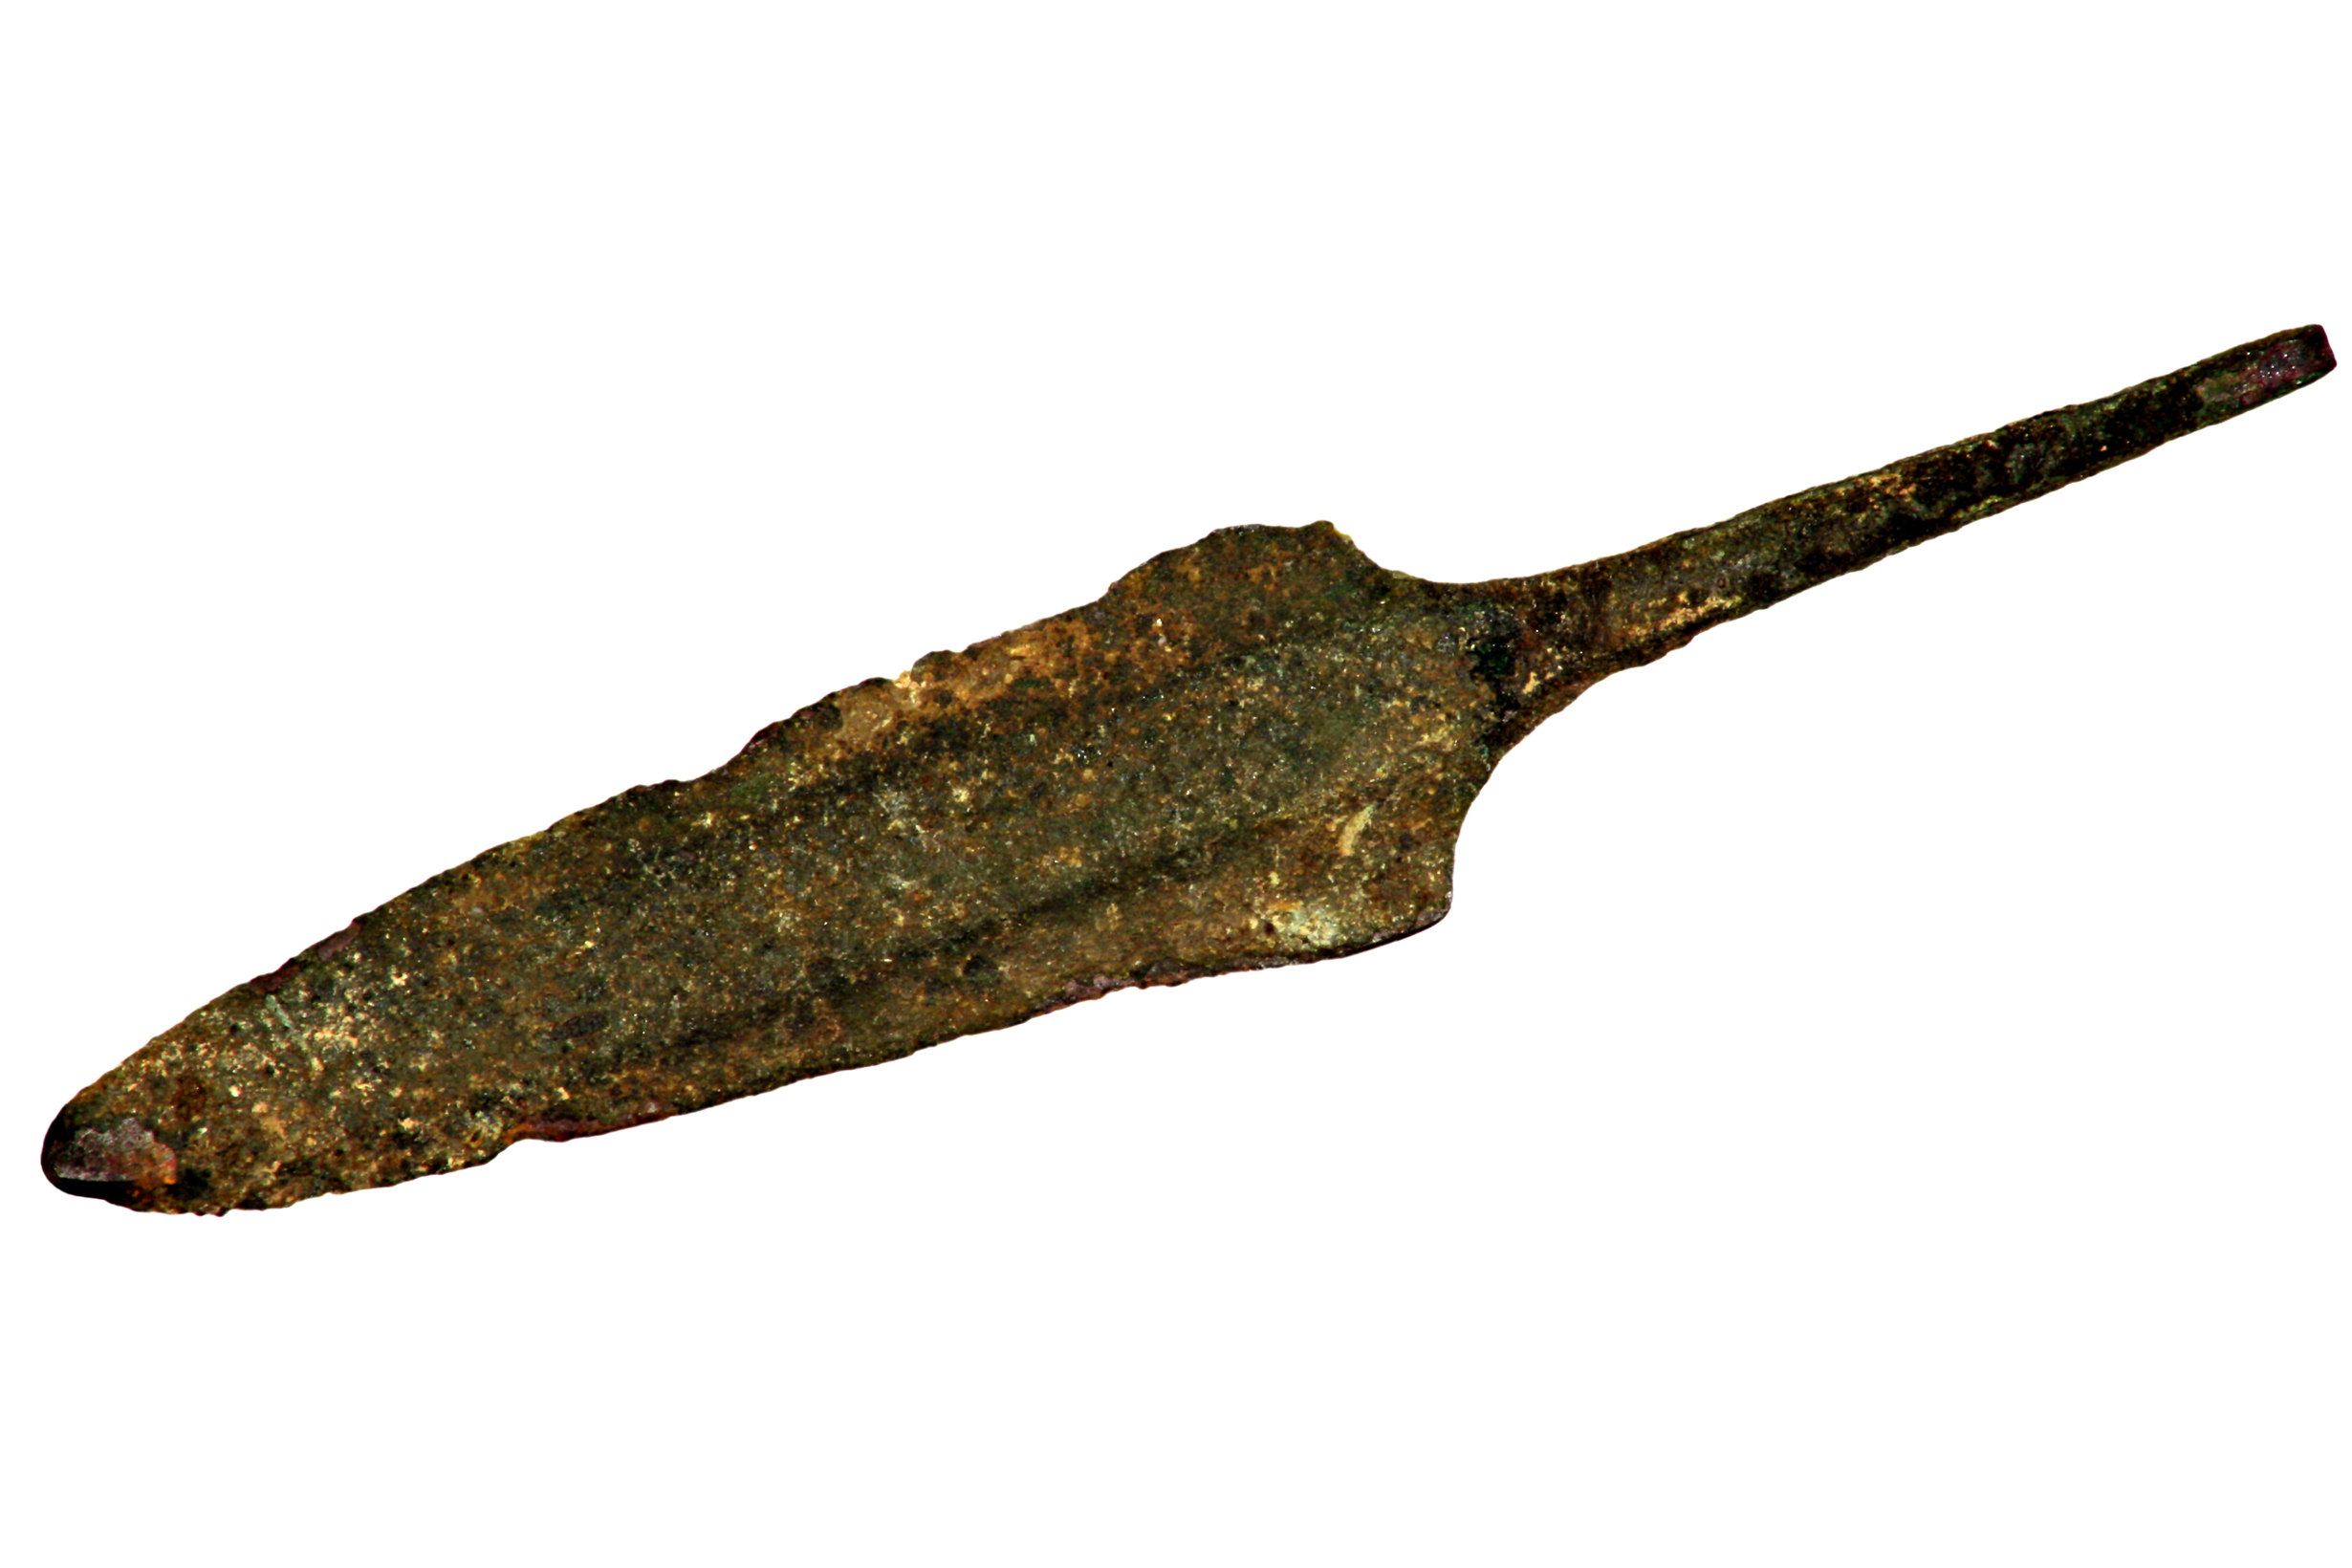 The resource charts metal working from early mankind, such as this bronze arrowhead from 500-1000 BC.